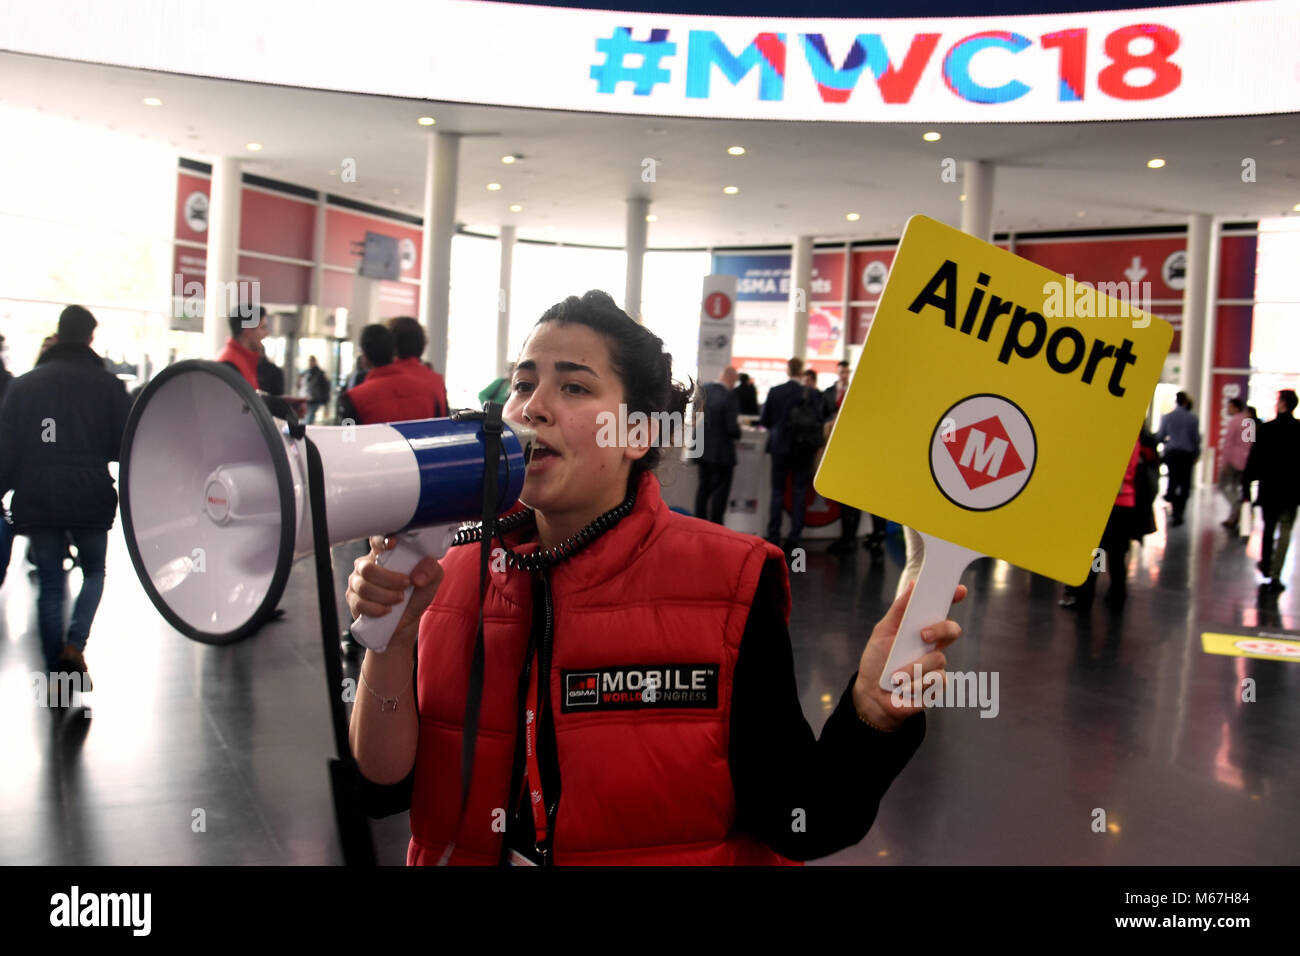 Barcelona, Spain. 1st Mar, 2018. A worker of the GSMA guide visitors to the airport exit at the Mobile World Congress in Barcelona.The Mobile World Congress 2018 is being hosted in Barcelona from 26 February to 1st March. Credit: Workers that make possible the MWC7  3 .jpg/SOPA Images/ZUMA Wire/Alamy Live News Stock Photo